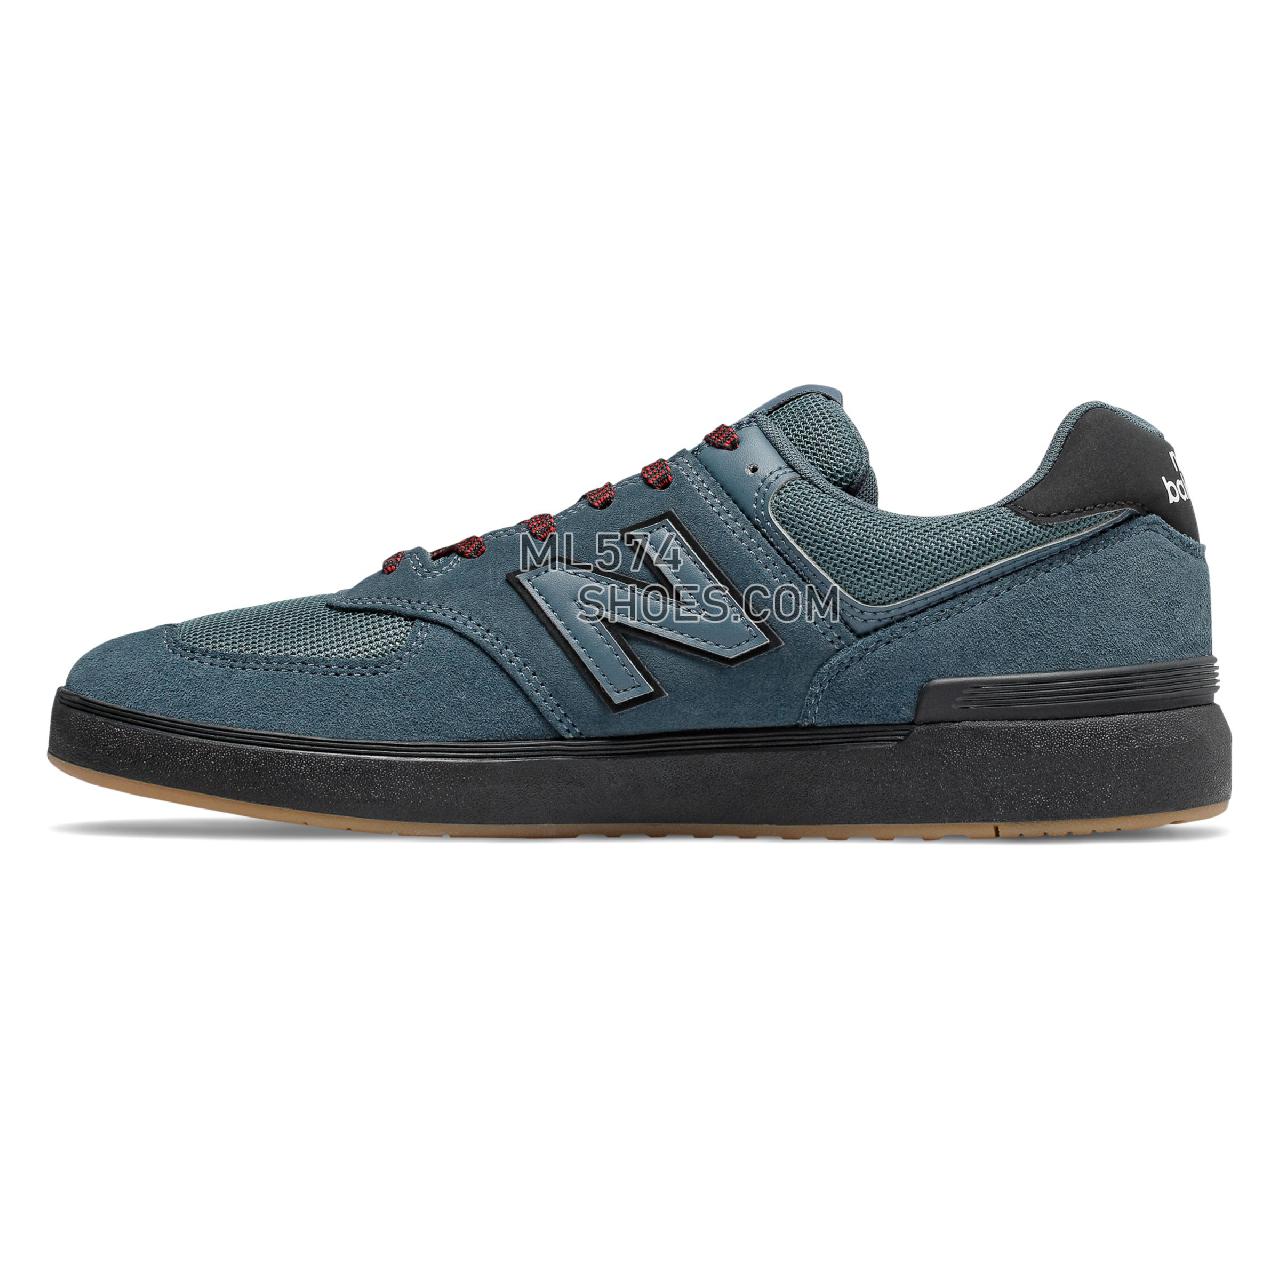 New Balance All Coasts 574 - Men's Court Classics - Orion Blue with Black - AM574BNY